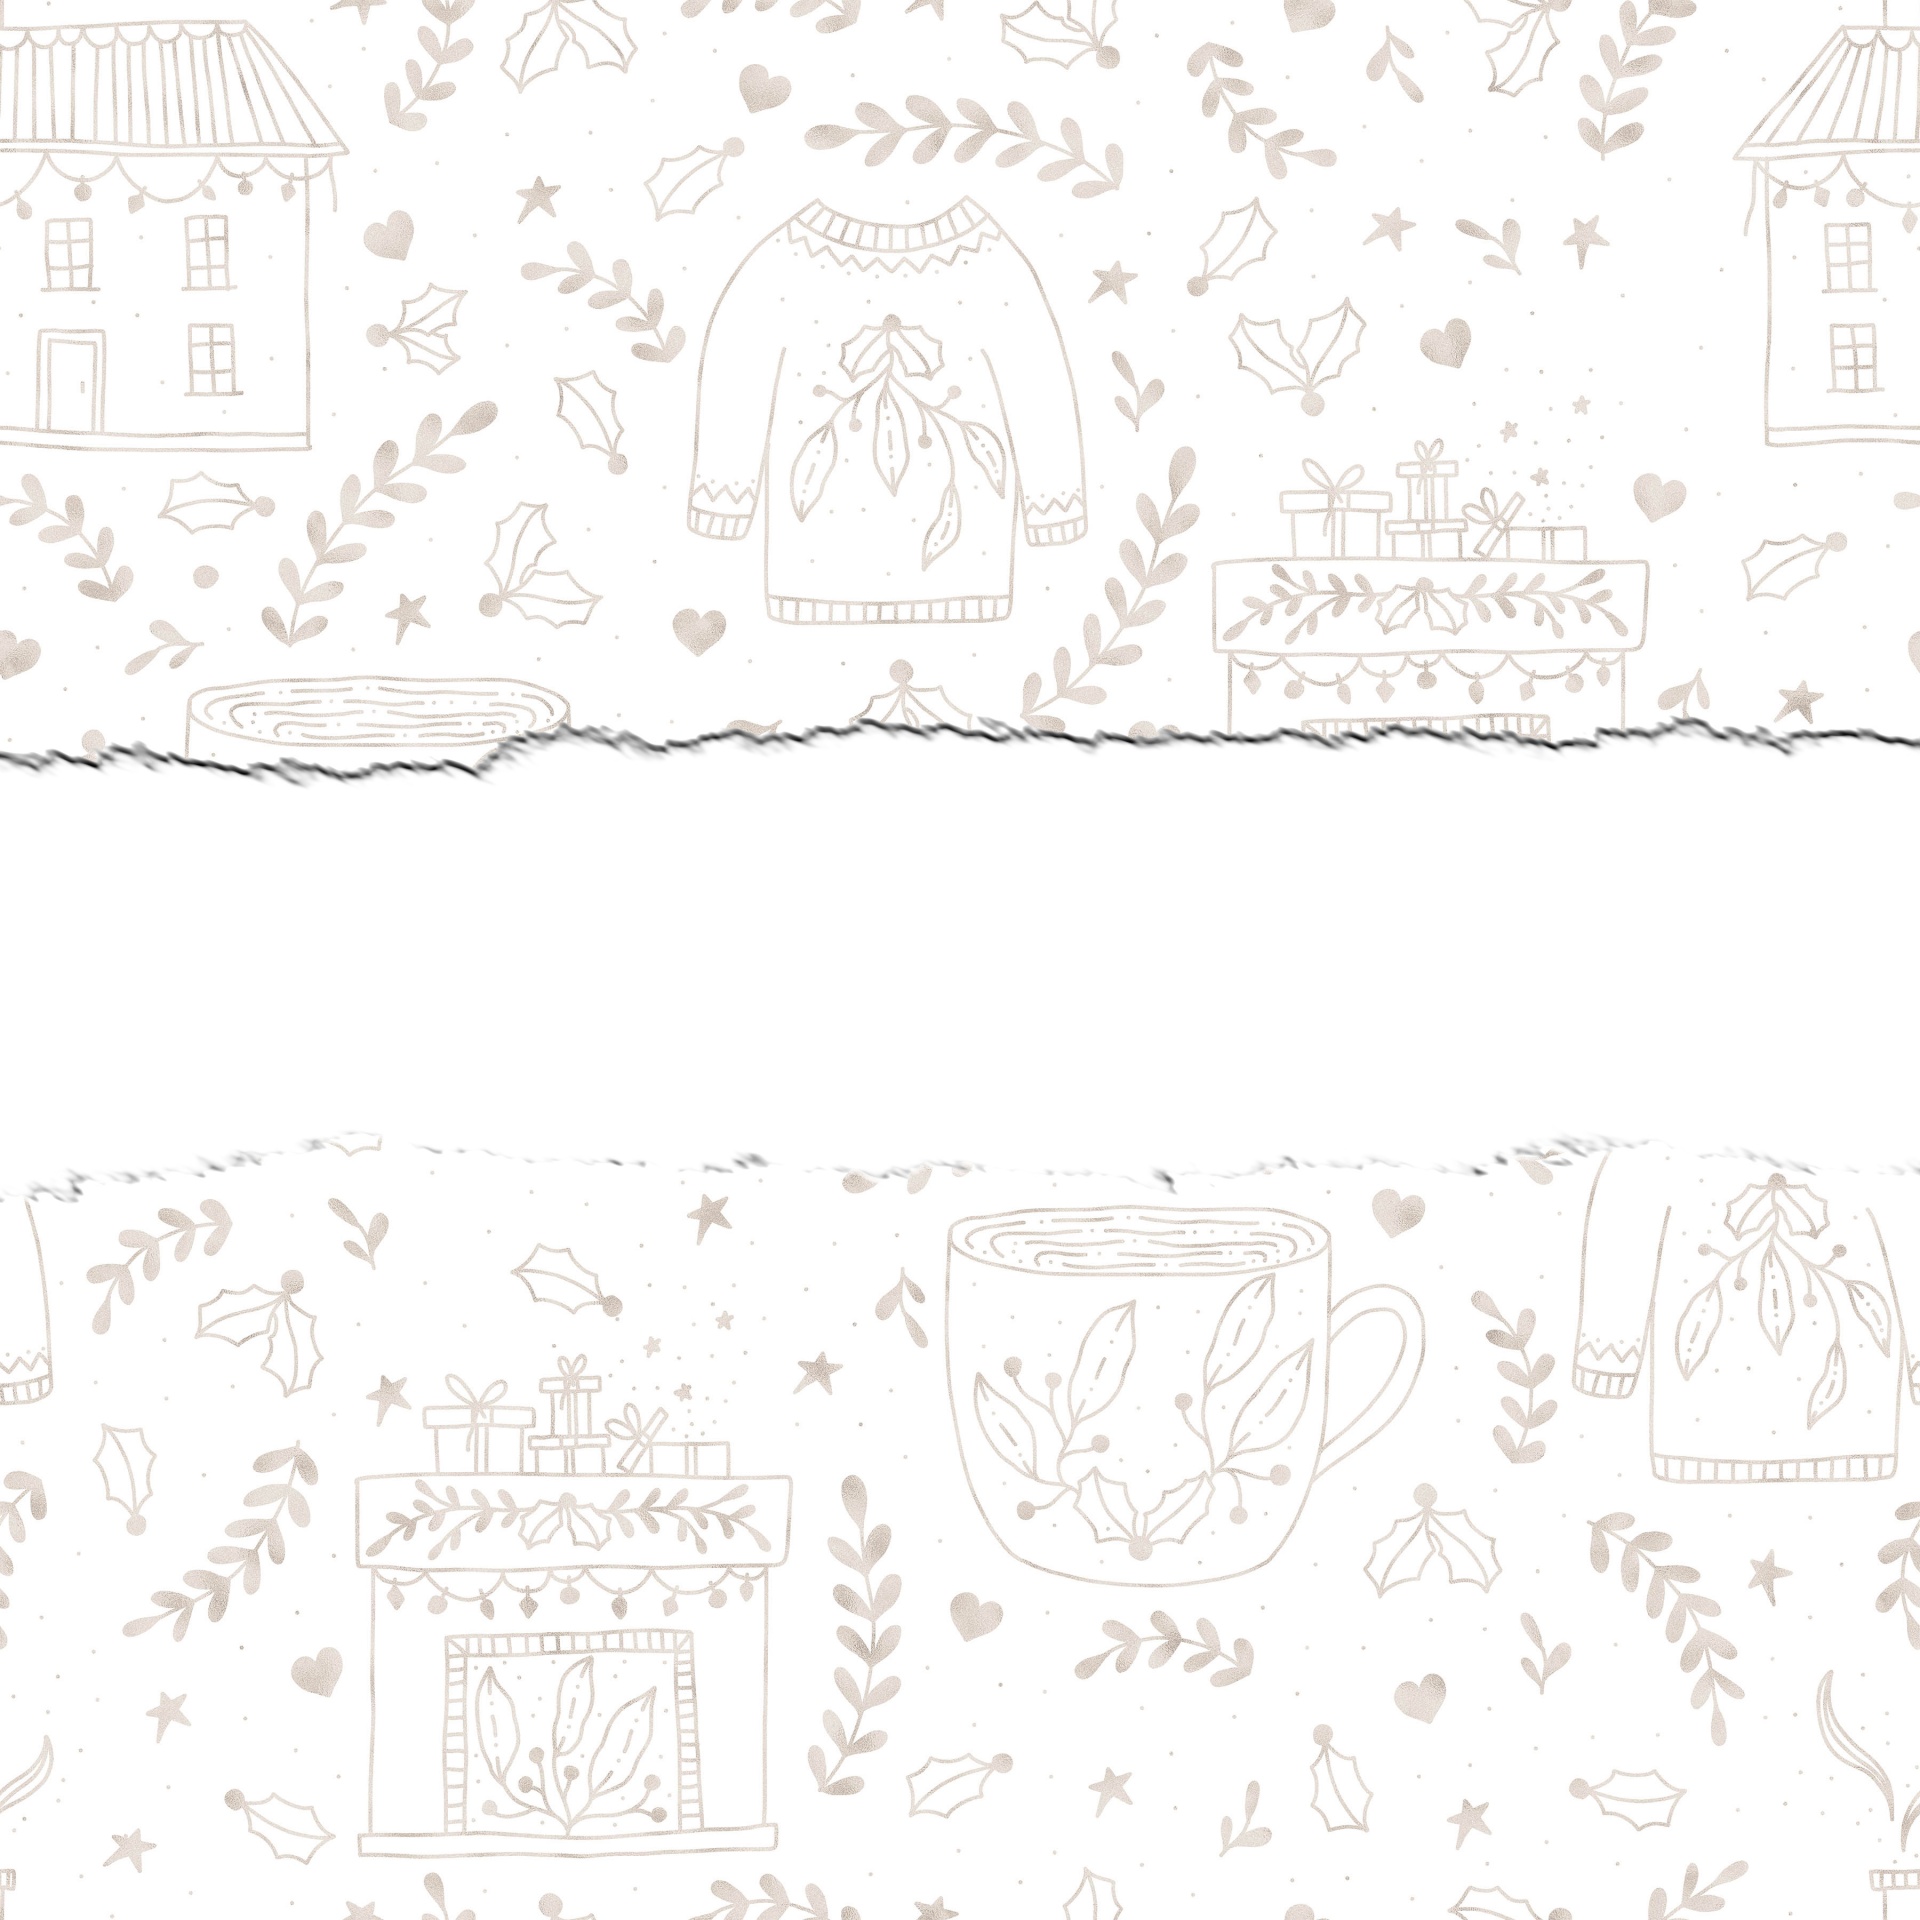 cute Christmas line art illustrations paper with a blank horizontal grunge line to write your own greeting